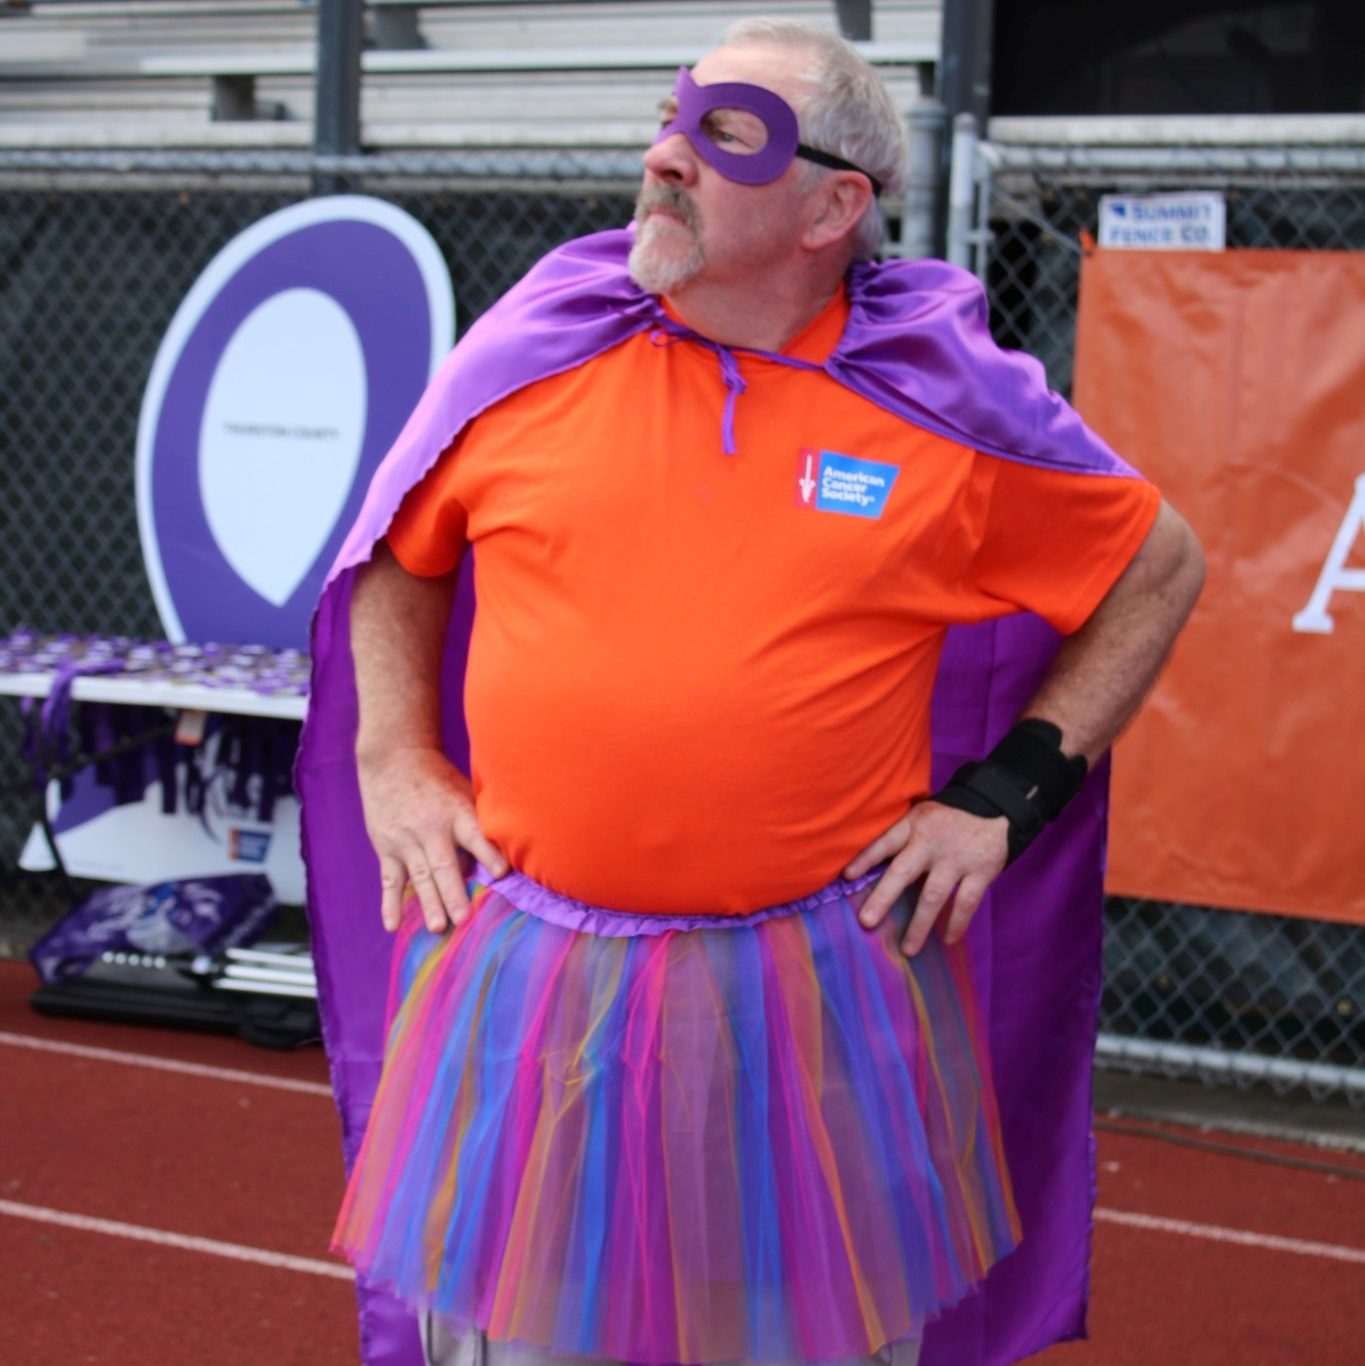 man wearing a purple and pink tutu and a purple cape with an orange shirt standing on a track with his hands on his hips